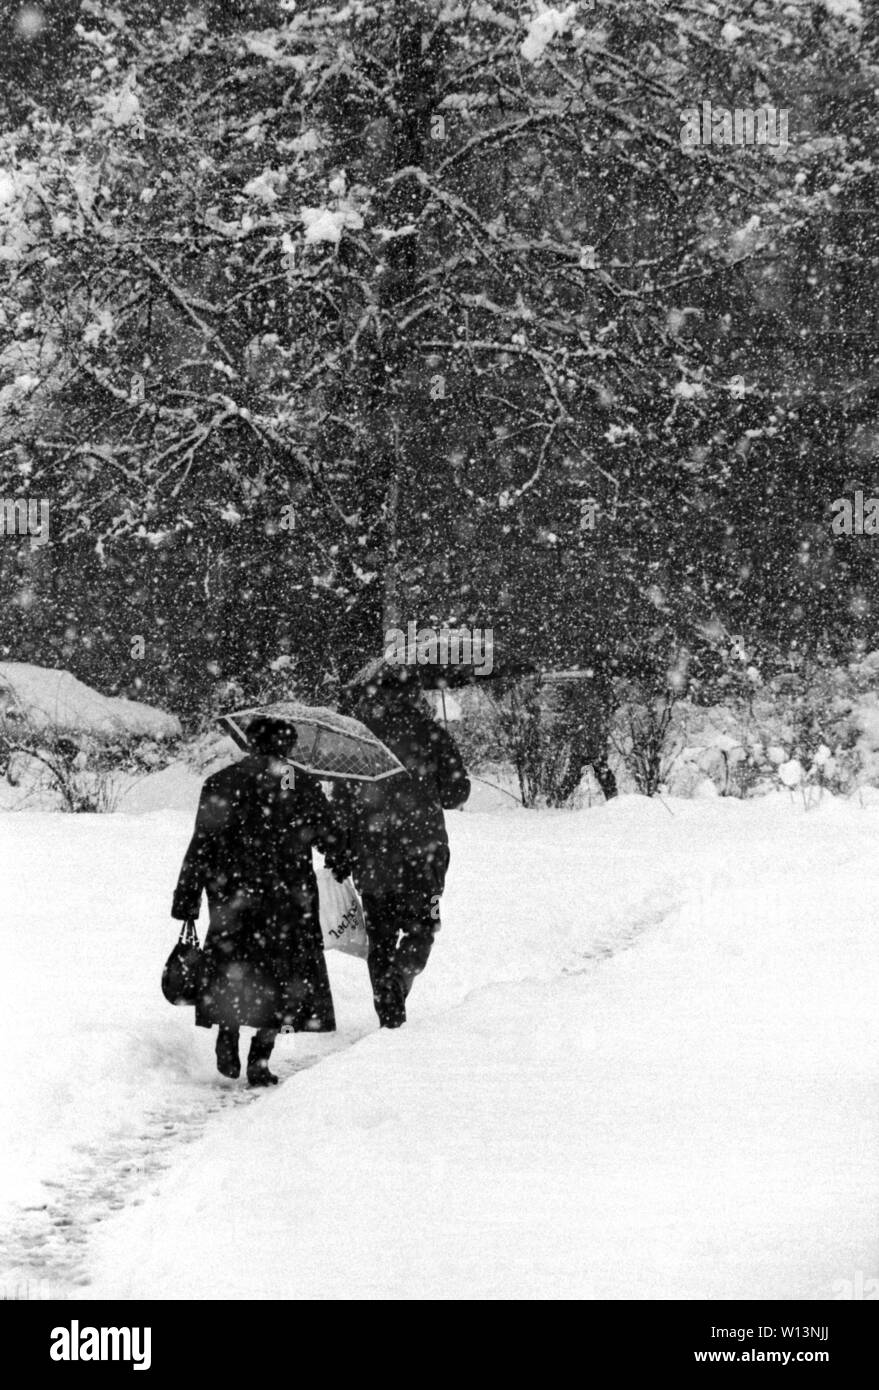 26th March 1993 During the Siege of Sarajevo: in a heavy snow shower, an elderly couple walk through snow in the little park adjacent to the the Presidency. Stock Photo